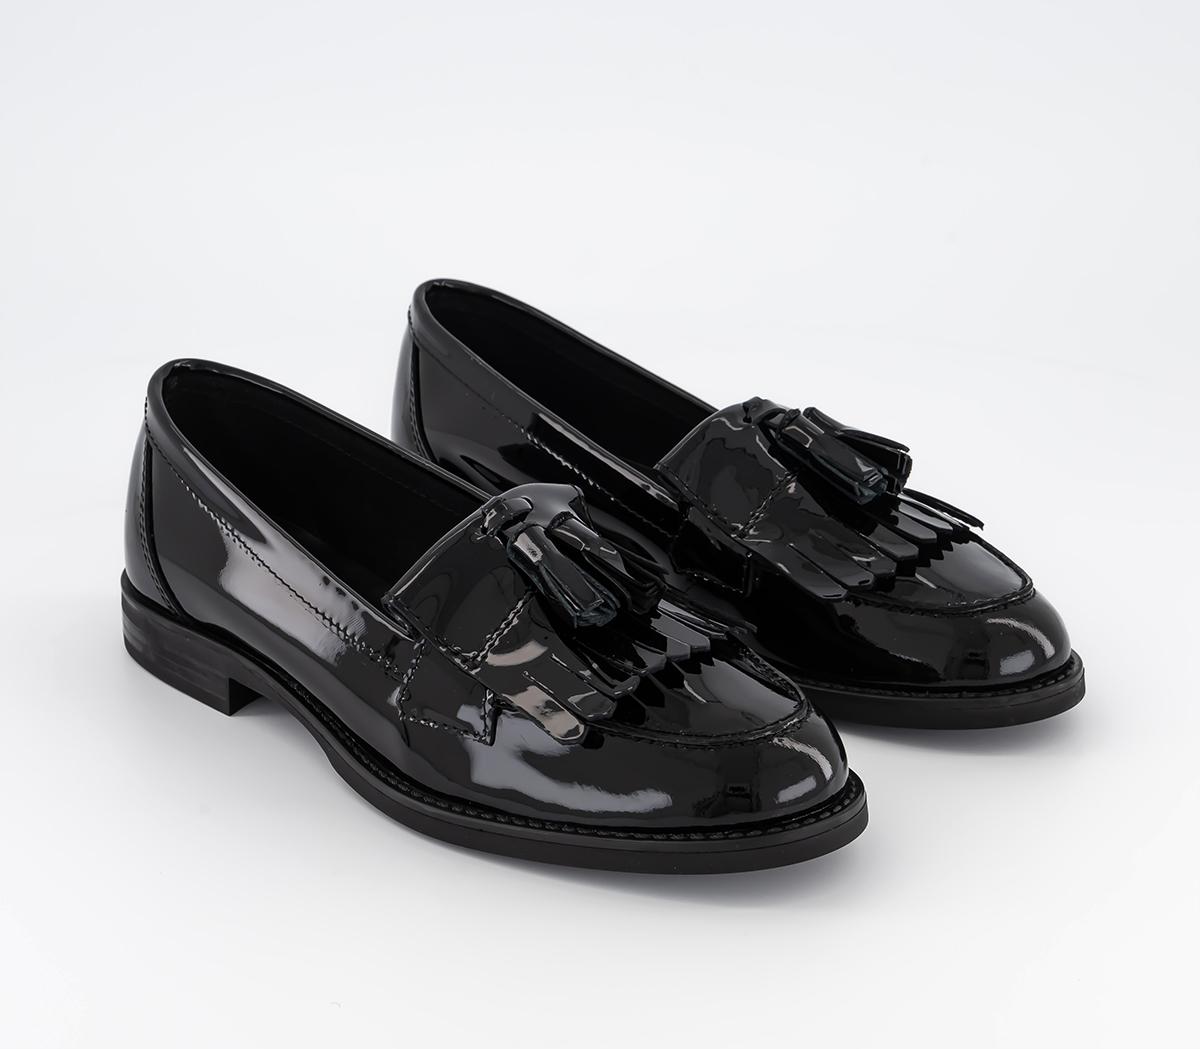 OFFICE Womens Fitz Tassle Fringe Loafers Black Patent Leather, 4